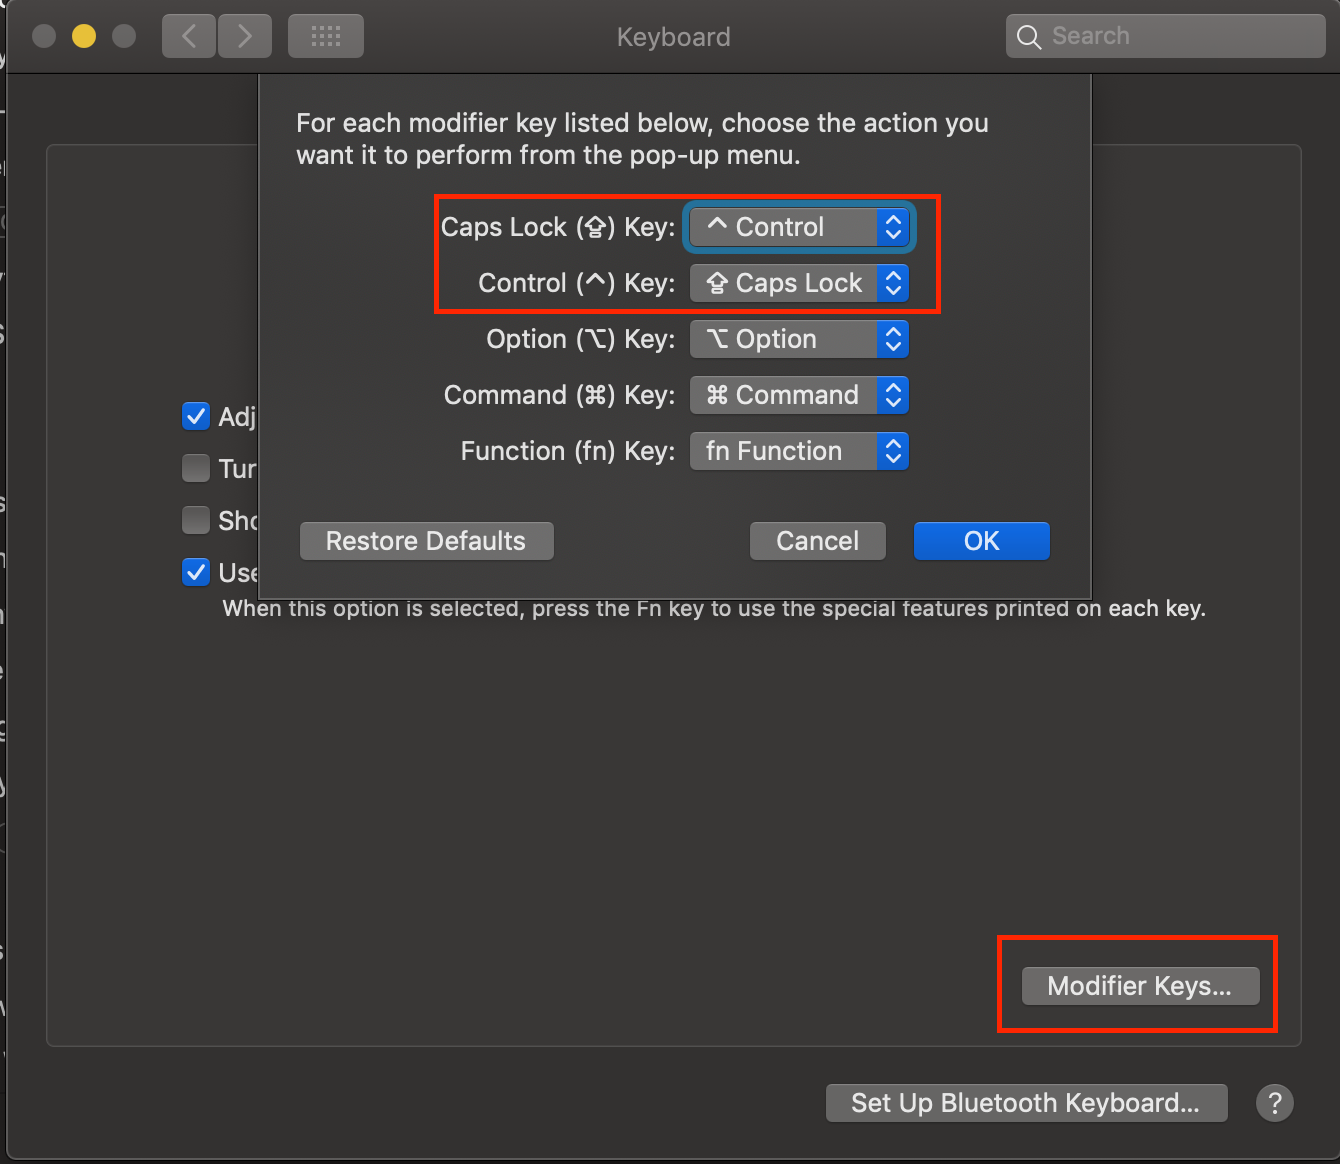 A picture of the Modifiers dialog box where you make these setting changes.